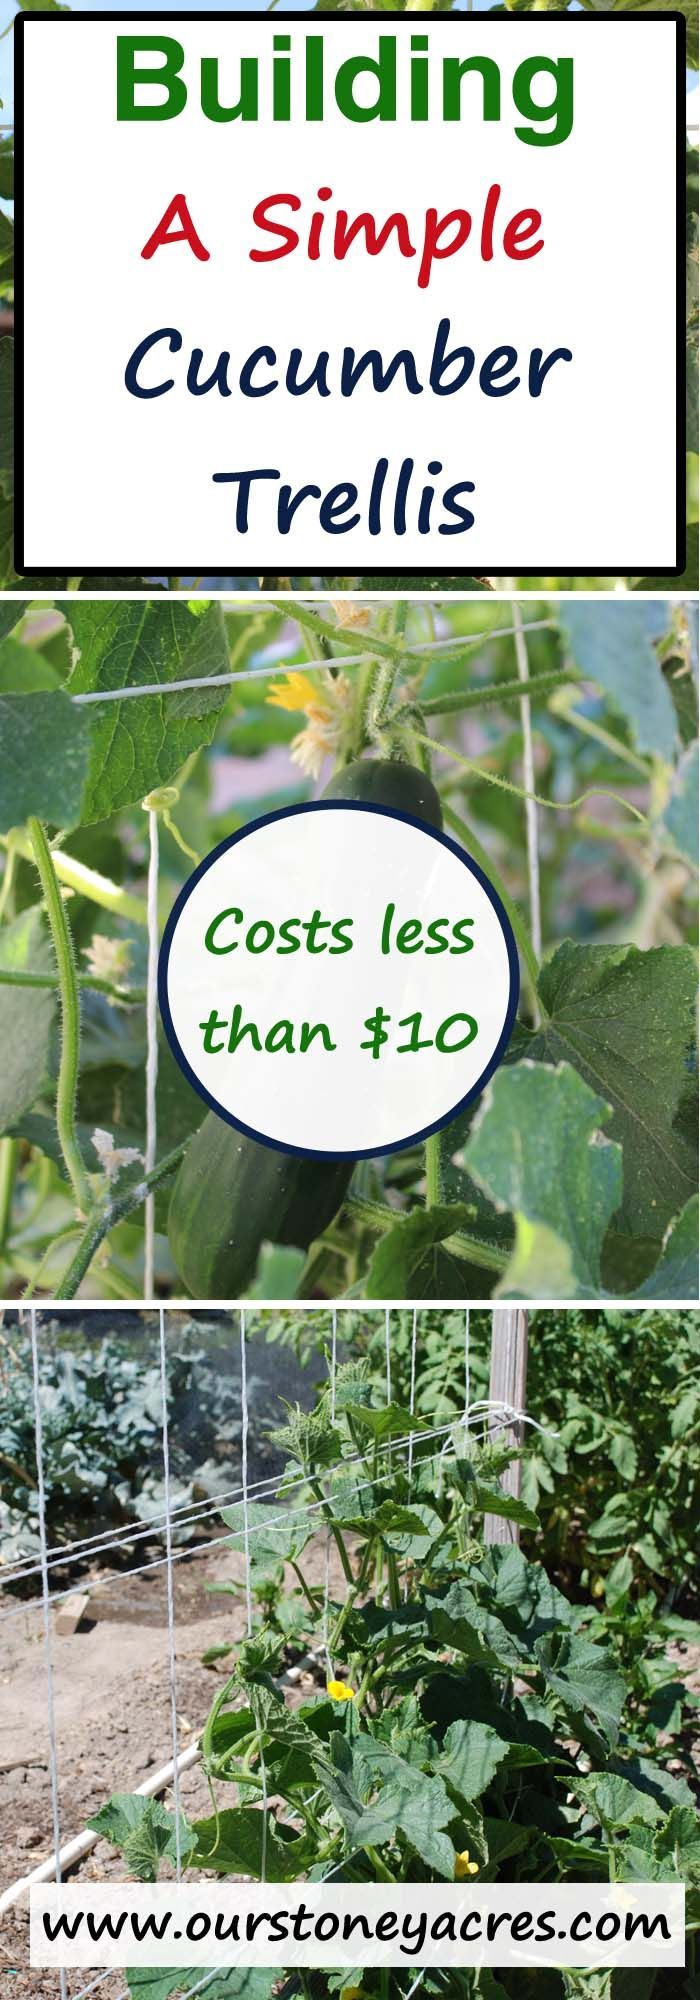 Building a simple cucumber trellis for your garden will help the production of your cucumber plants.  This plan uses easy to find